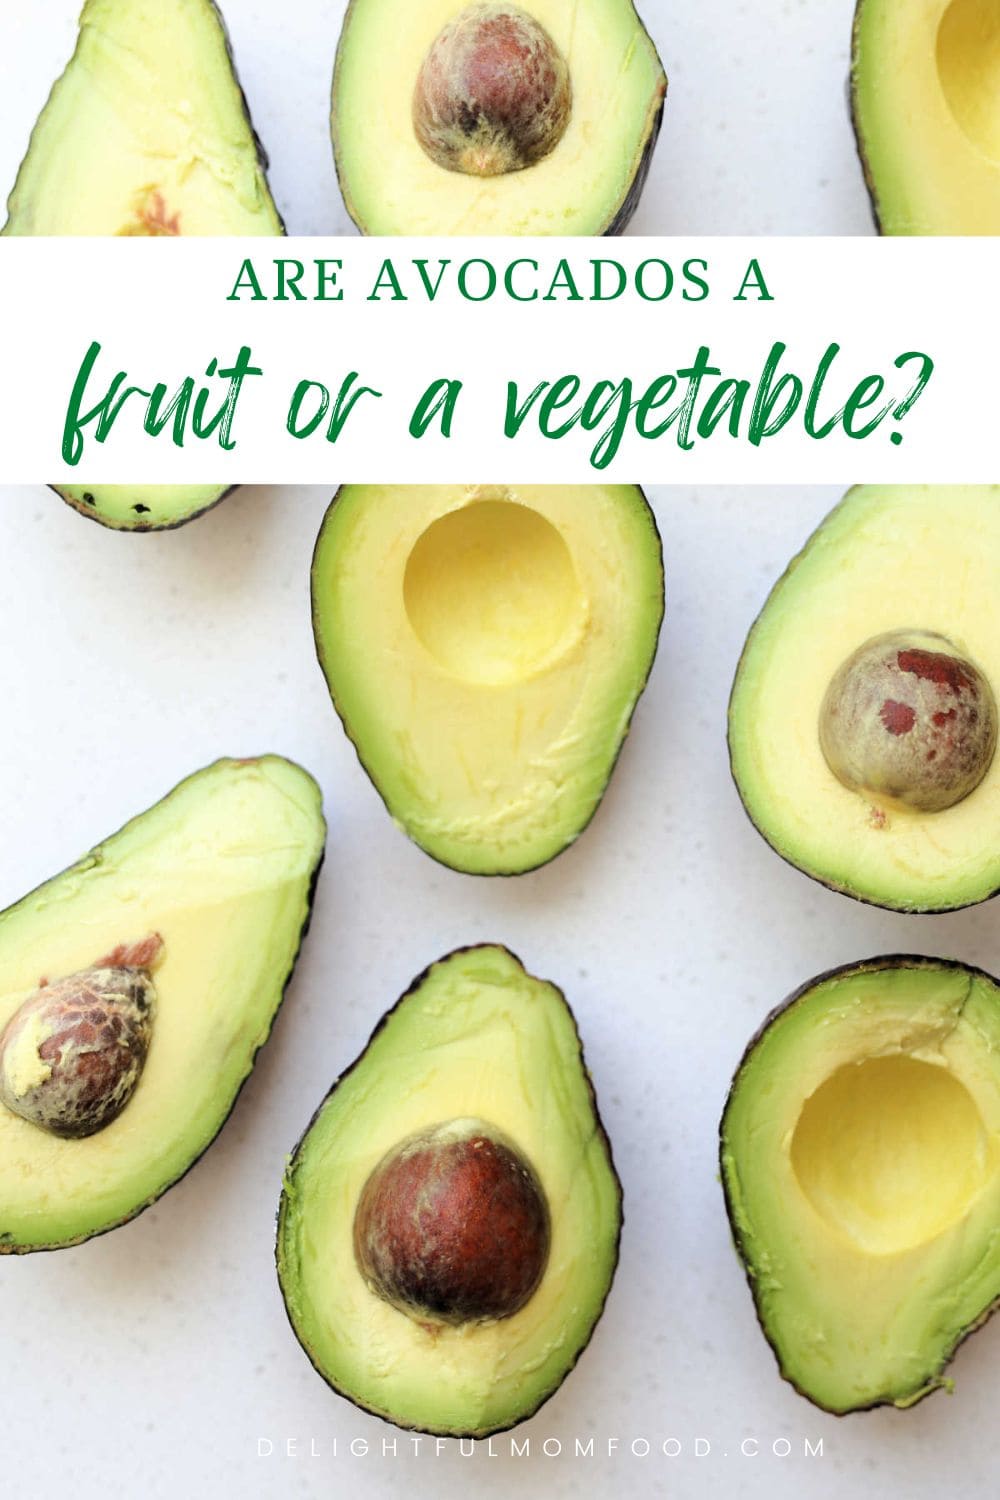 are avocados a fruit or a vegetable